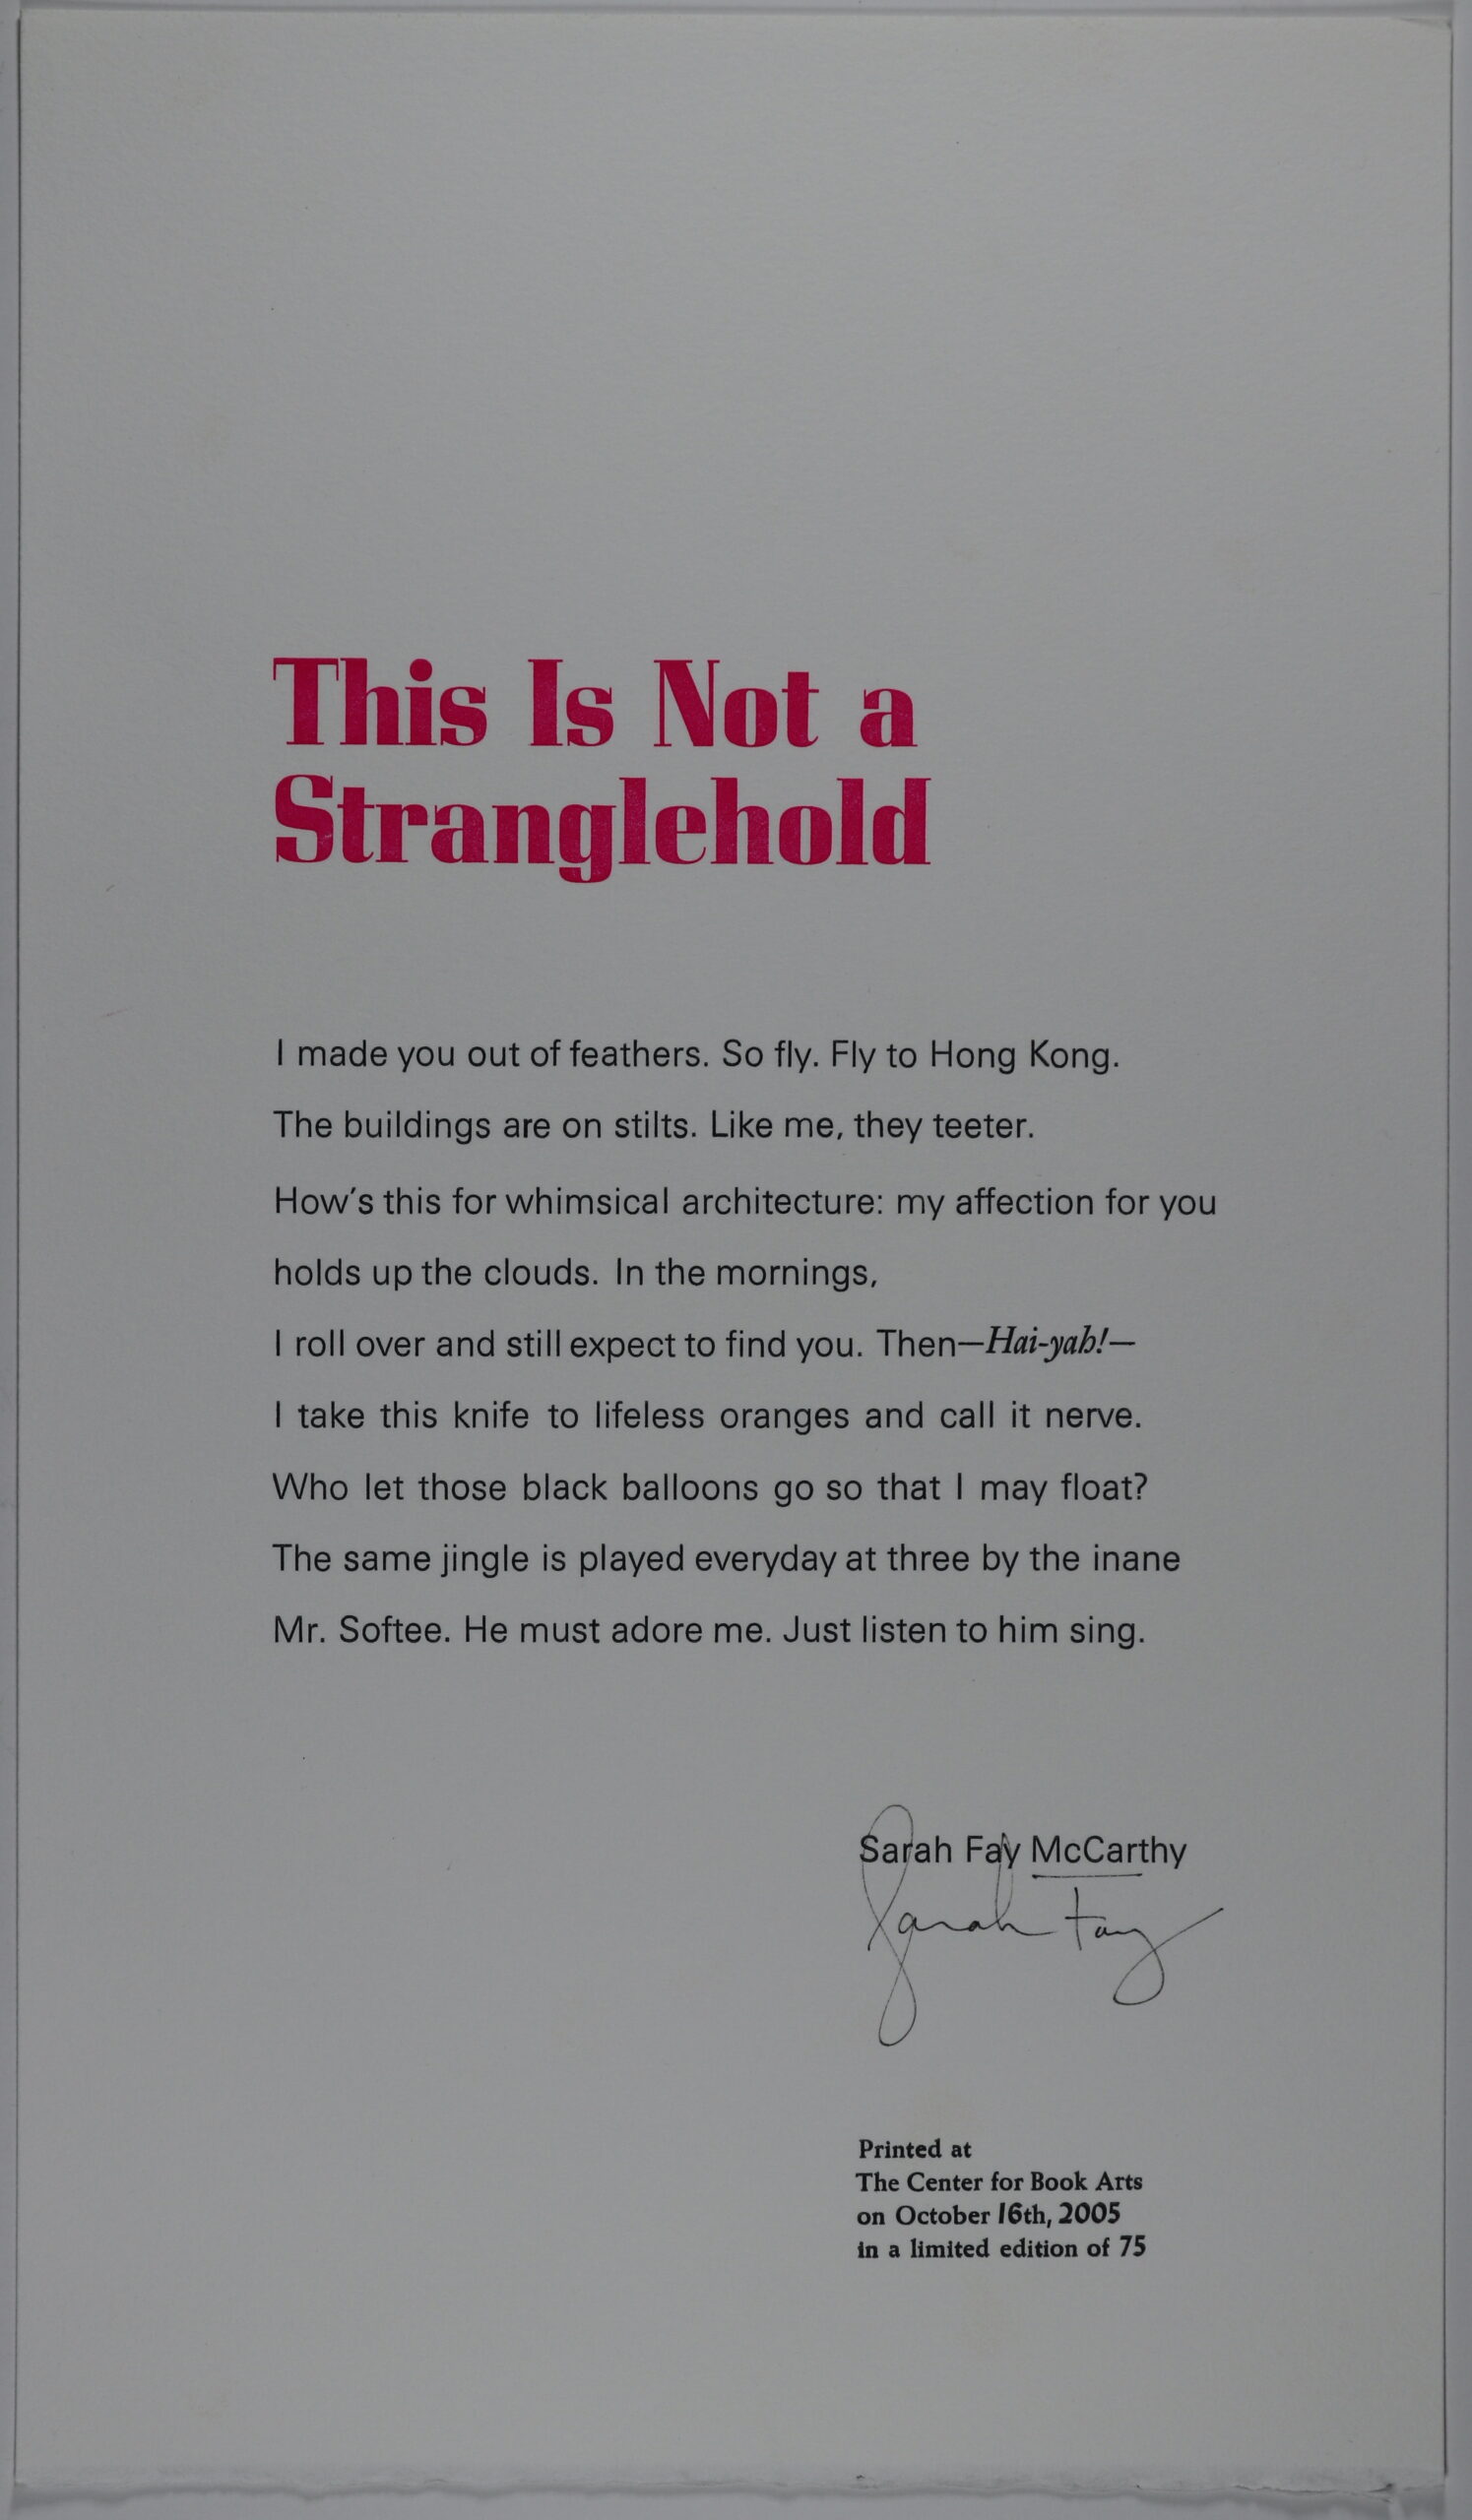 Broadside consists of a white background with the title in bold and large pink lettering, black text in a smaller font in the center, formatted into paragraphs.